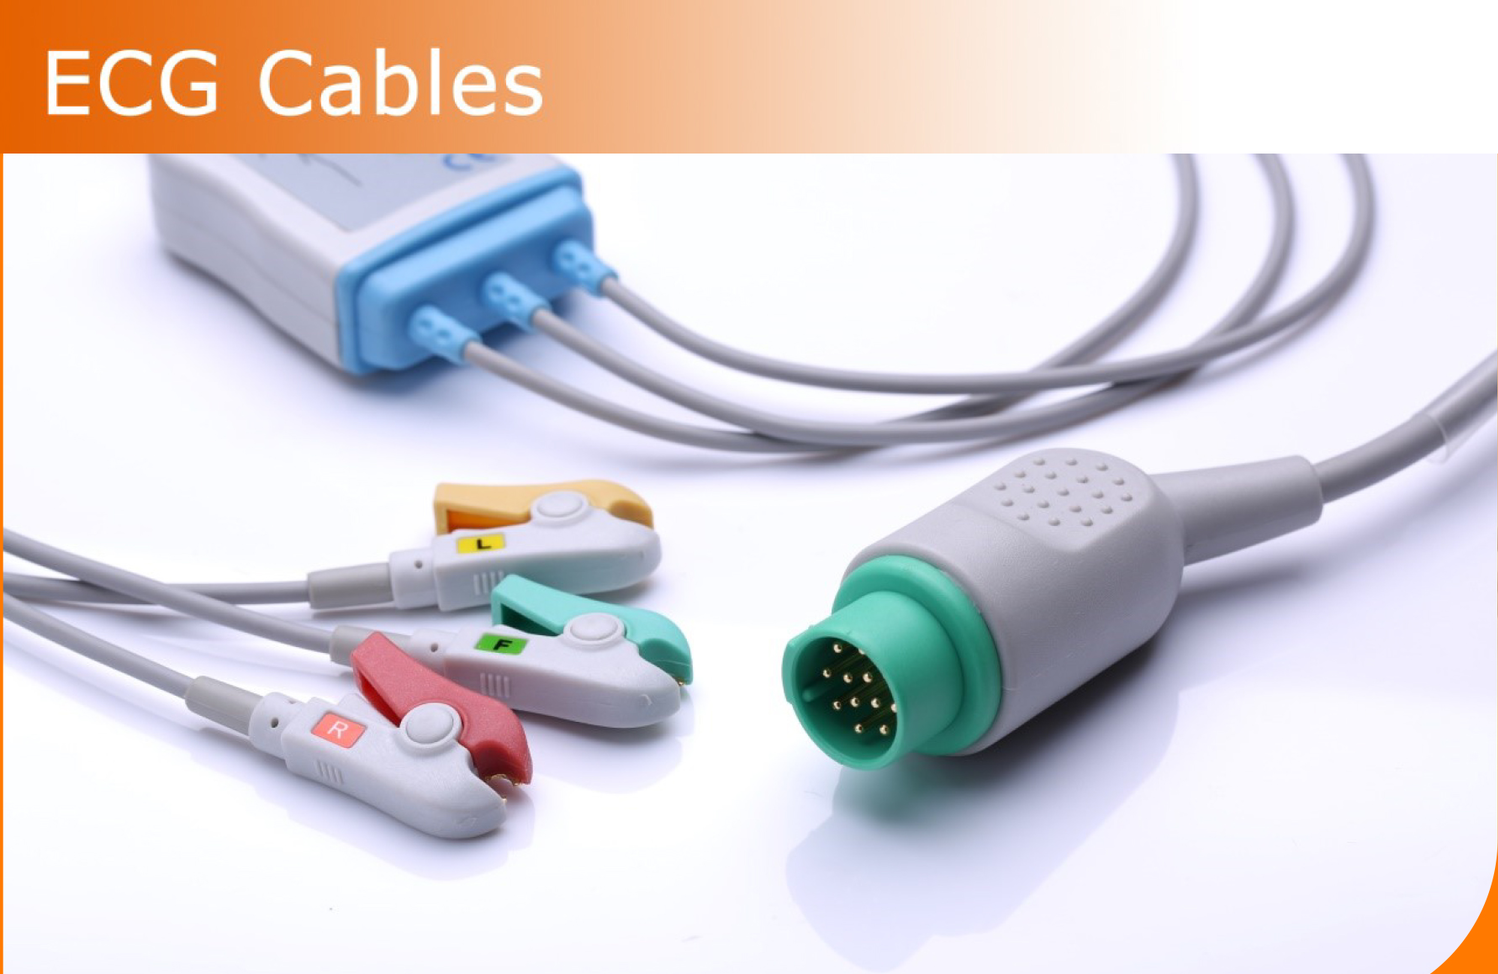 <p><span style="font-weight: bold;">ECG Cables</span><br></p>